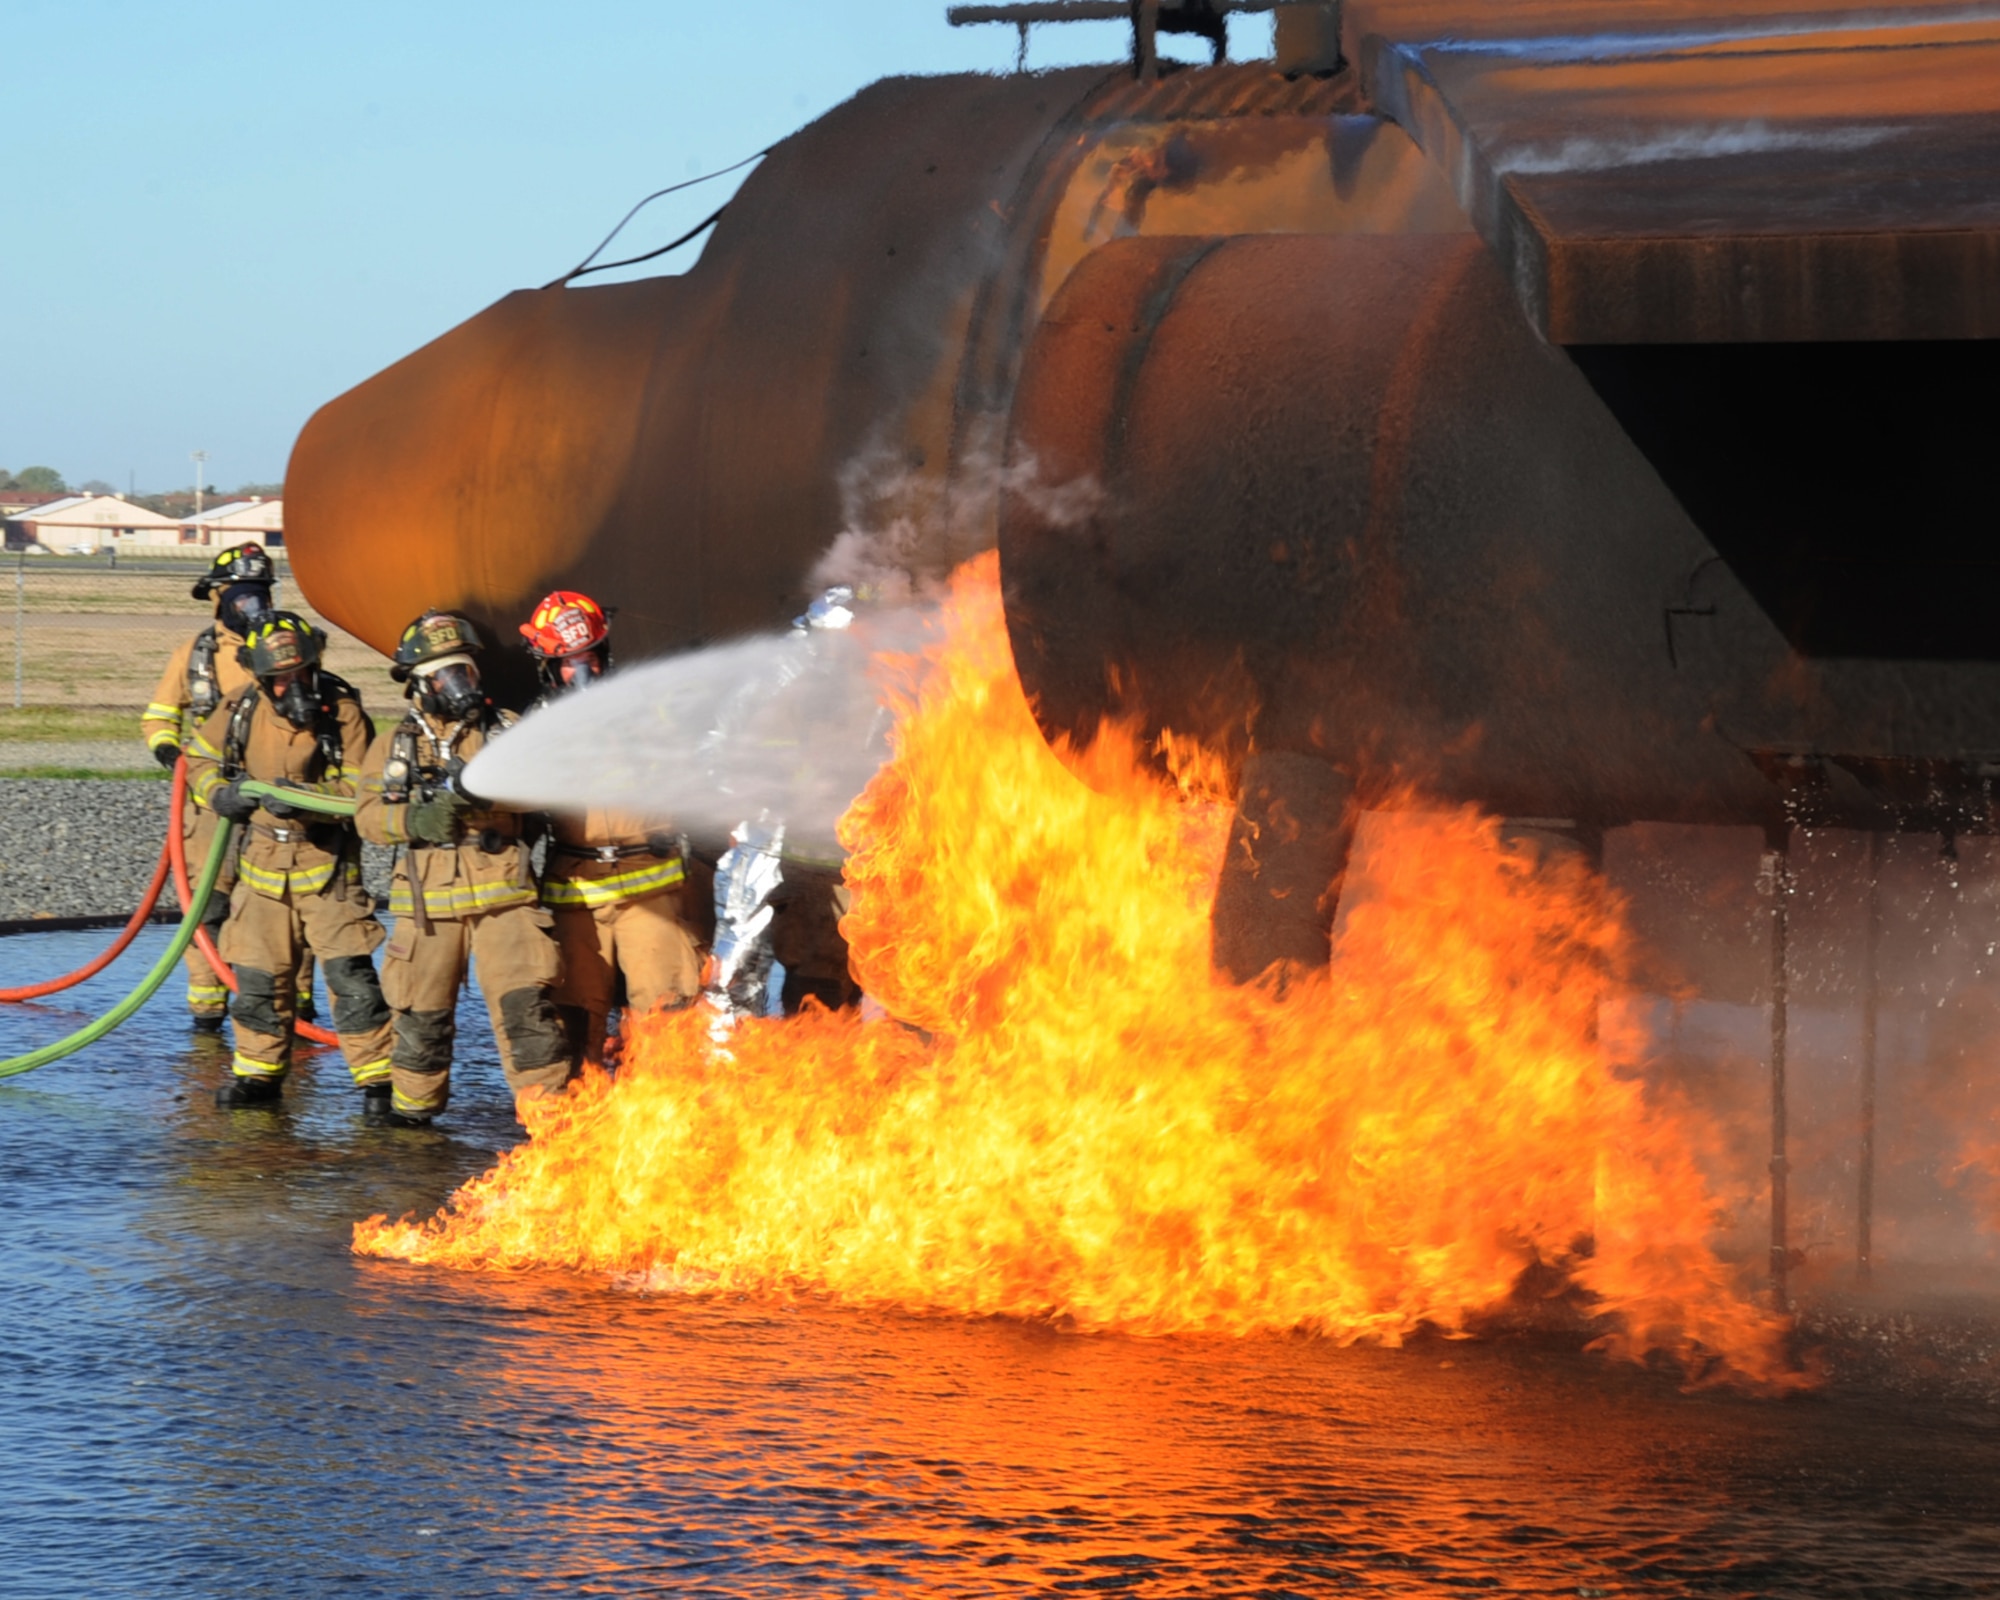 Firefighters from the Shreveport Fire Department extinguish an aircraft fire during a joint training exercise on Barksdale Air Force Base, La., March 15. Barksdale's Fire Department invited Shreveport fire fighters to use their facility and complete their annual aircraft training. (U.S. Air Force photo/Senior Airman Sean Martin)